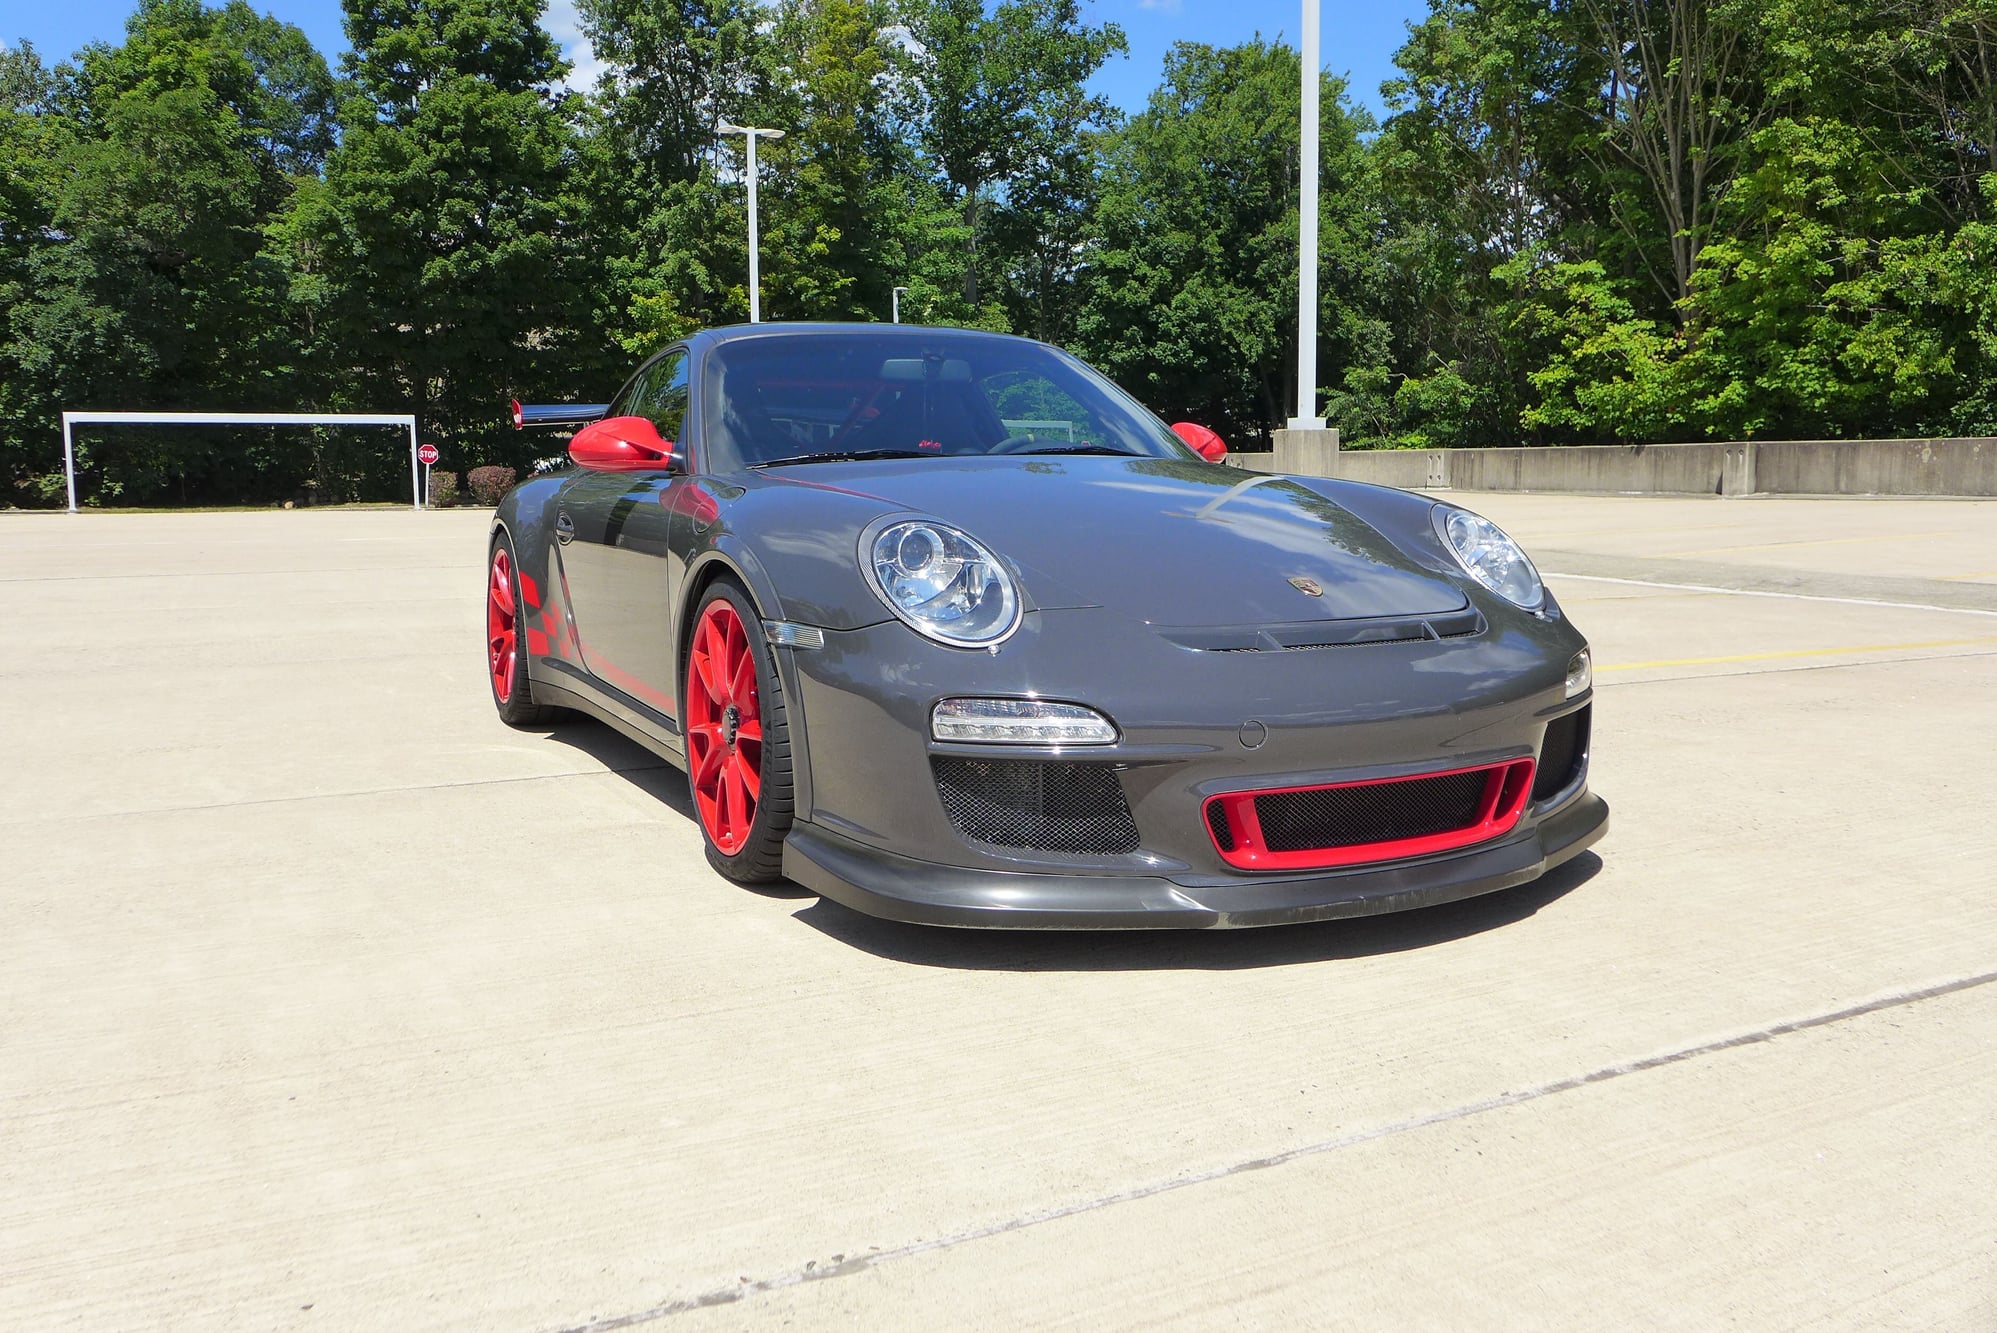 2010 Porsche GT3 - 2010 GT3RS - Black/Grey - 21k Miles - Used - VIN WP0AC2A9XAS783676 - 21,750 Miles - 6 cyl - 2WD - Manual - Coupe - Gray - Stratford, CT 06614, United States